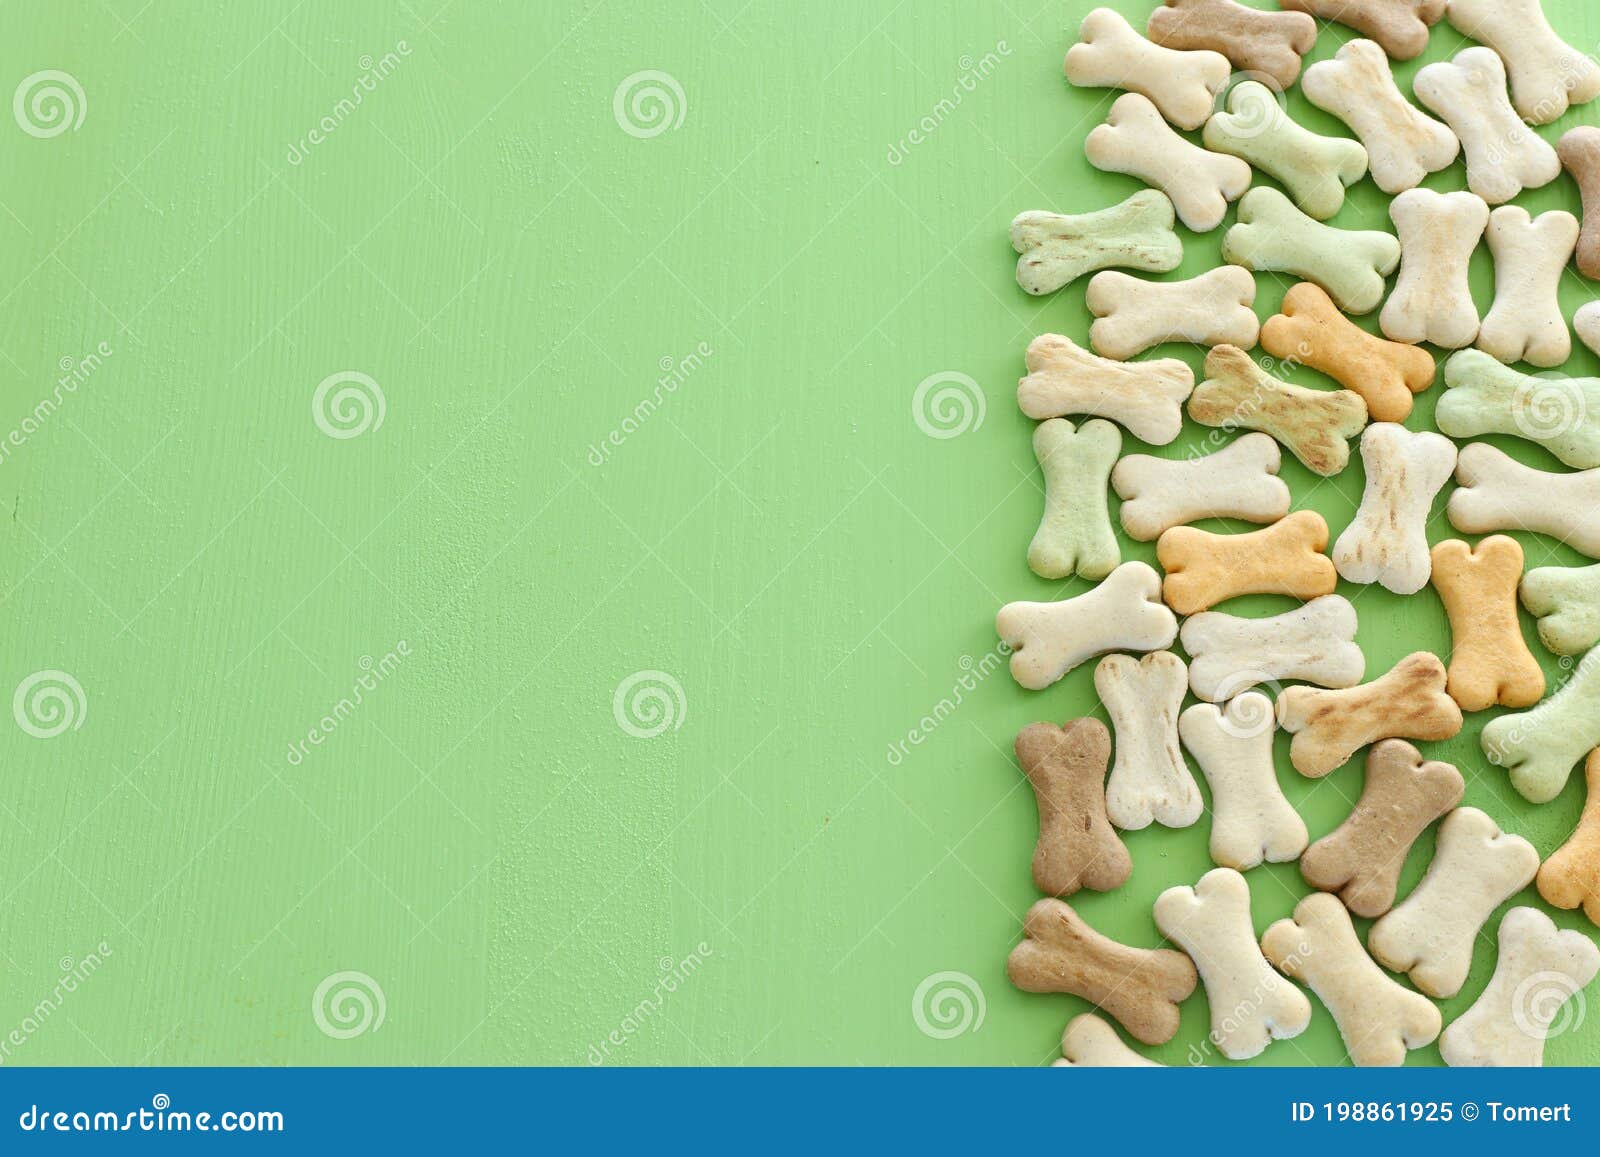 top view of dog treats over green wooden background